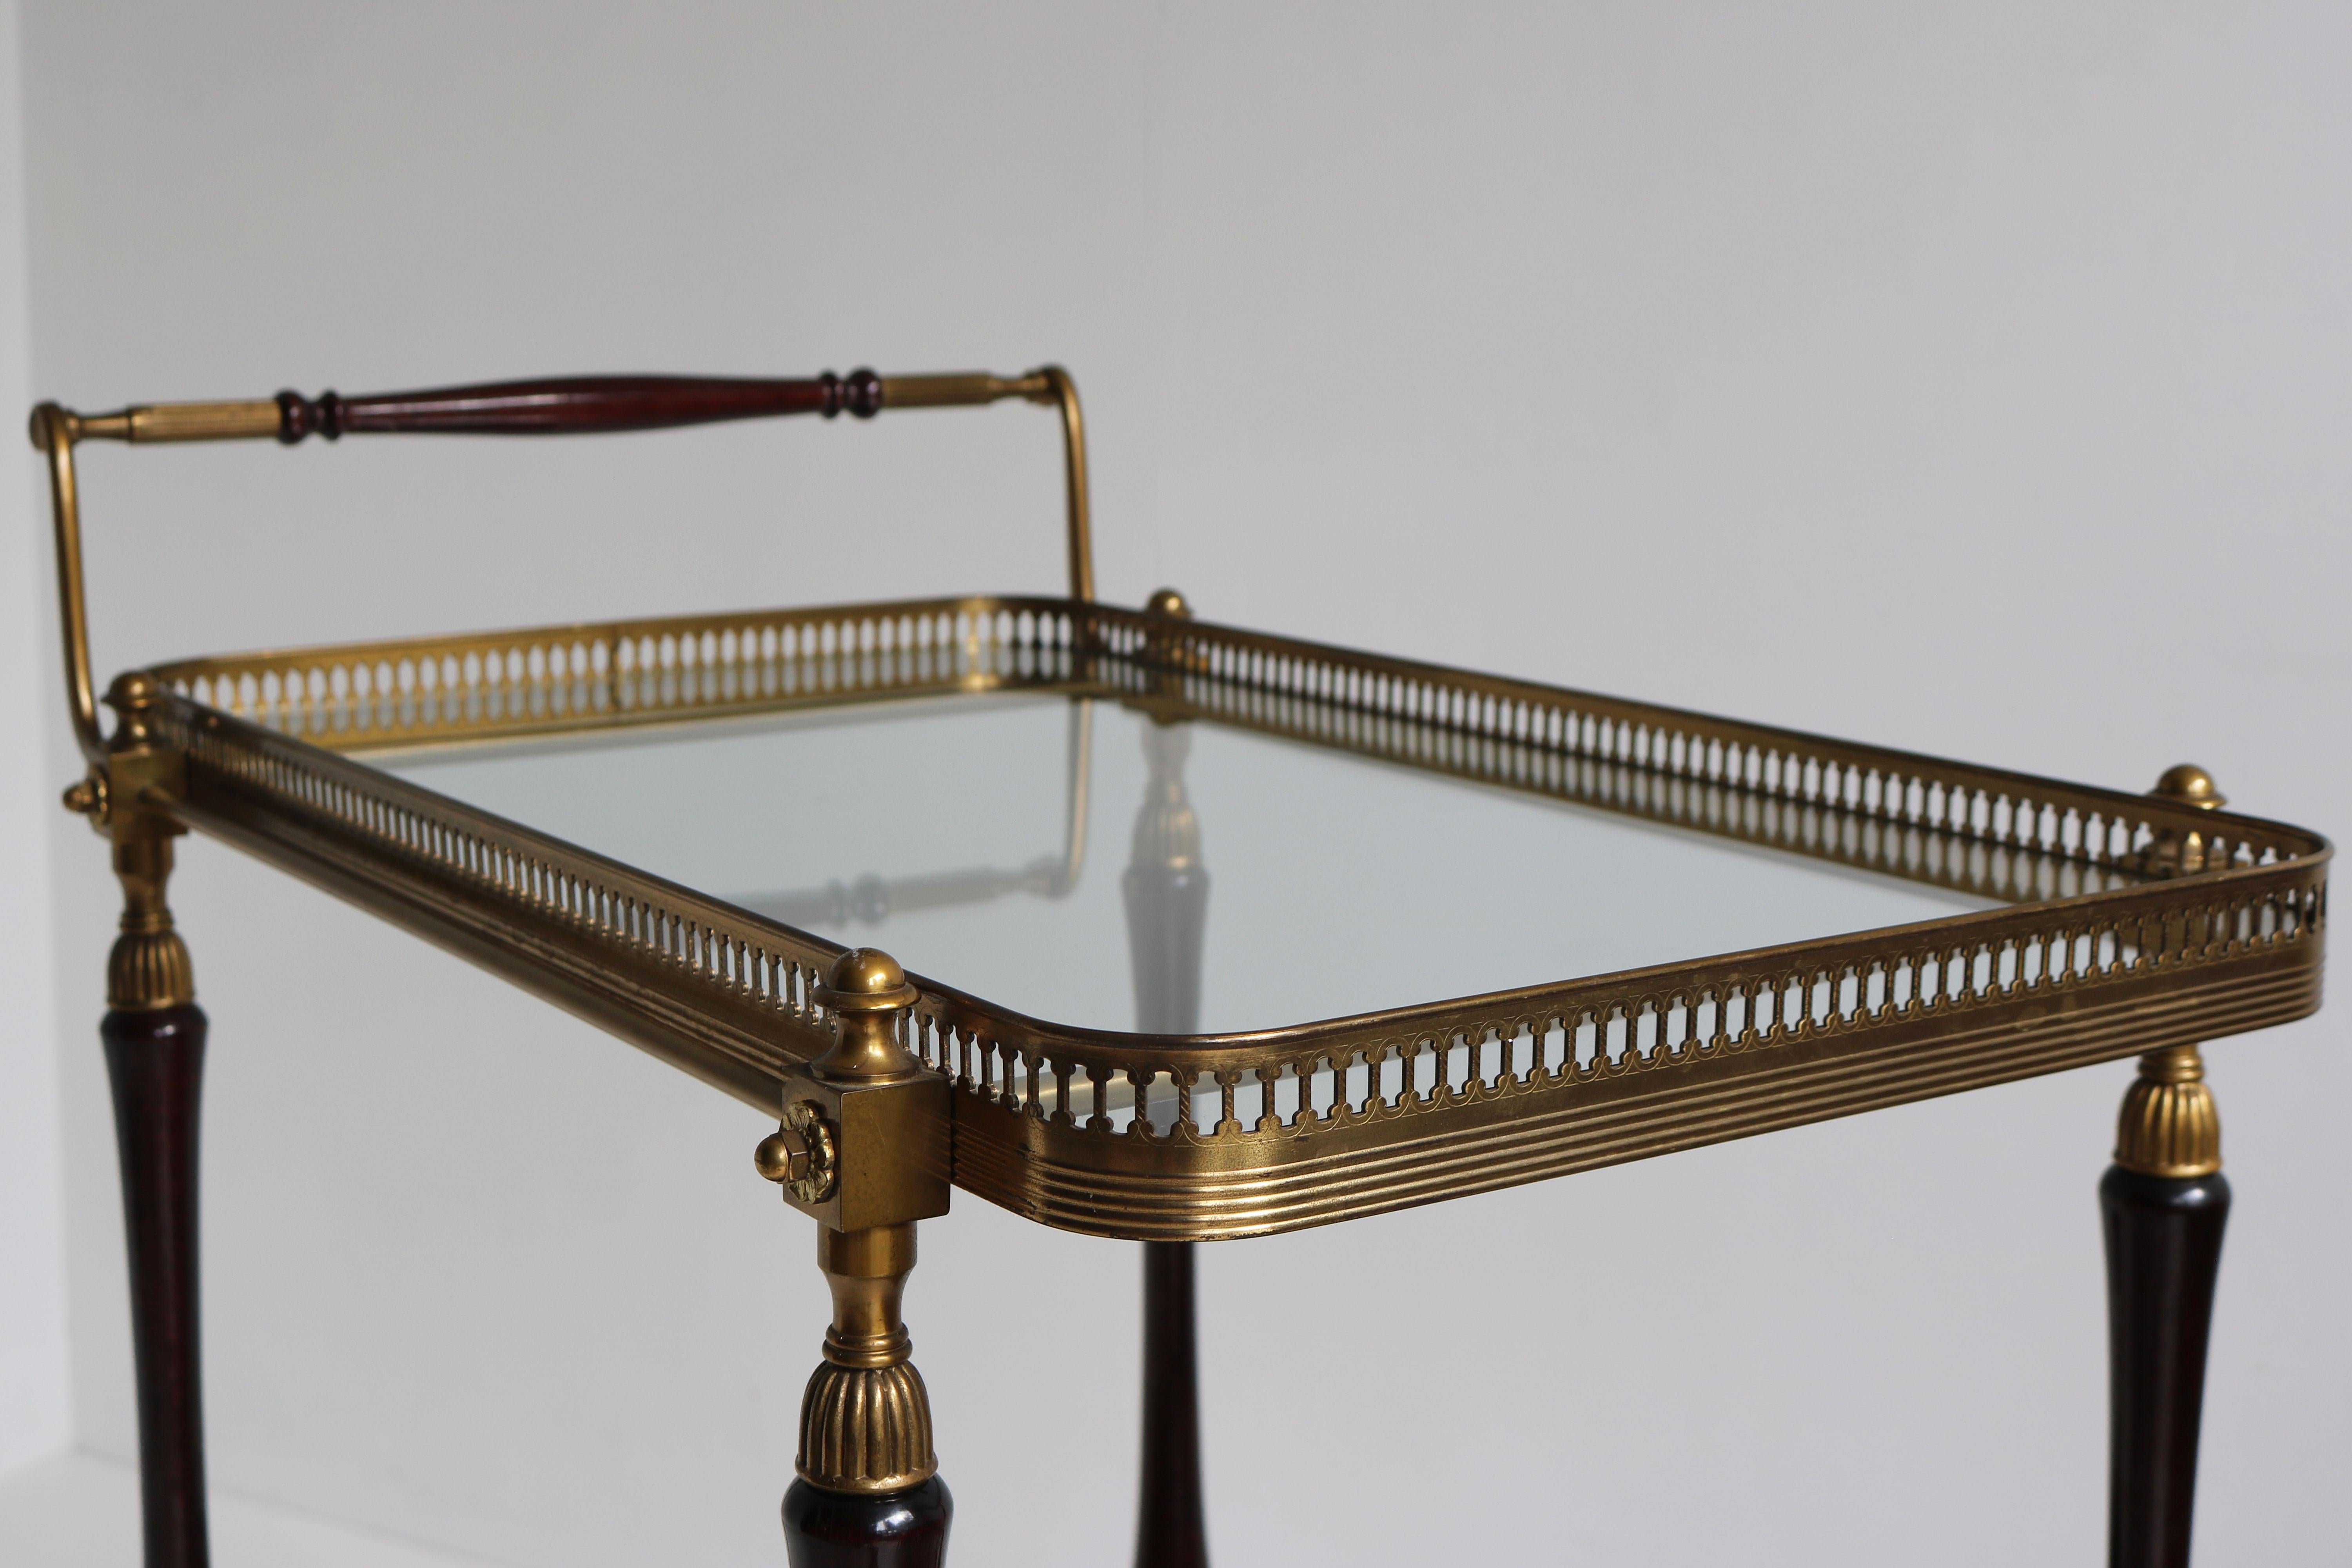 Hand-Crafted French Design Bar Cart by Maison Bagues 1950 Brass Glass Wood Serving Trolley